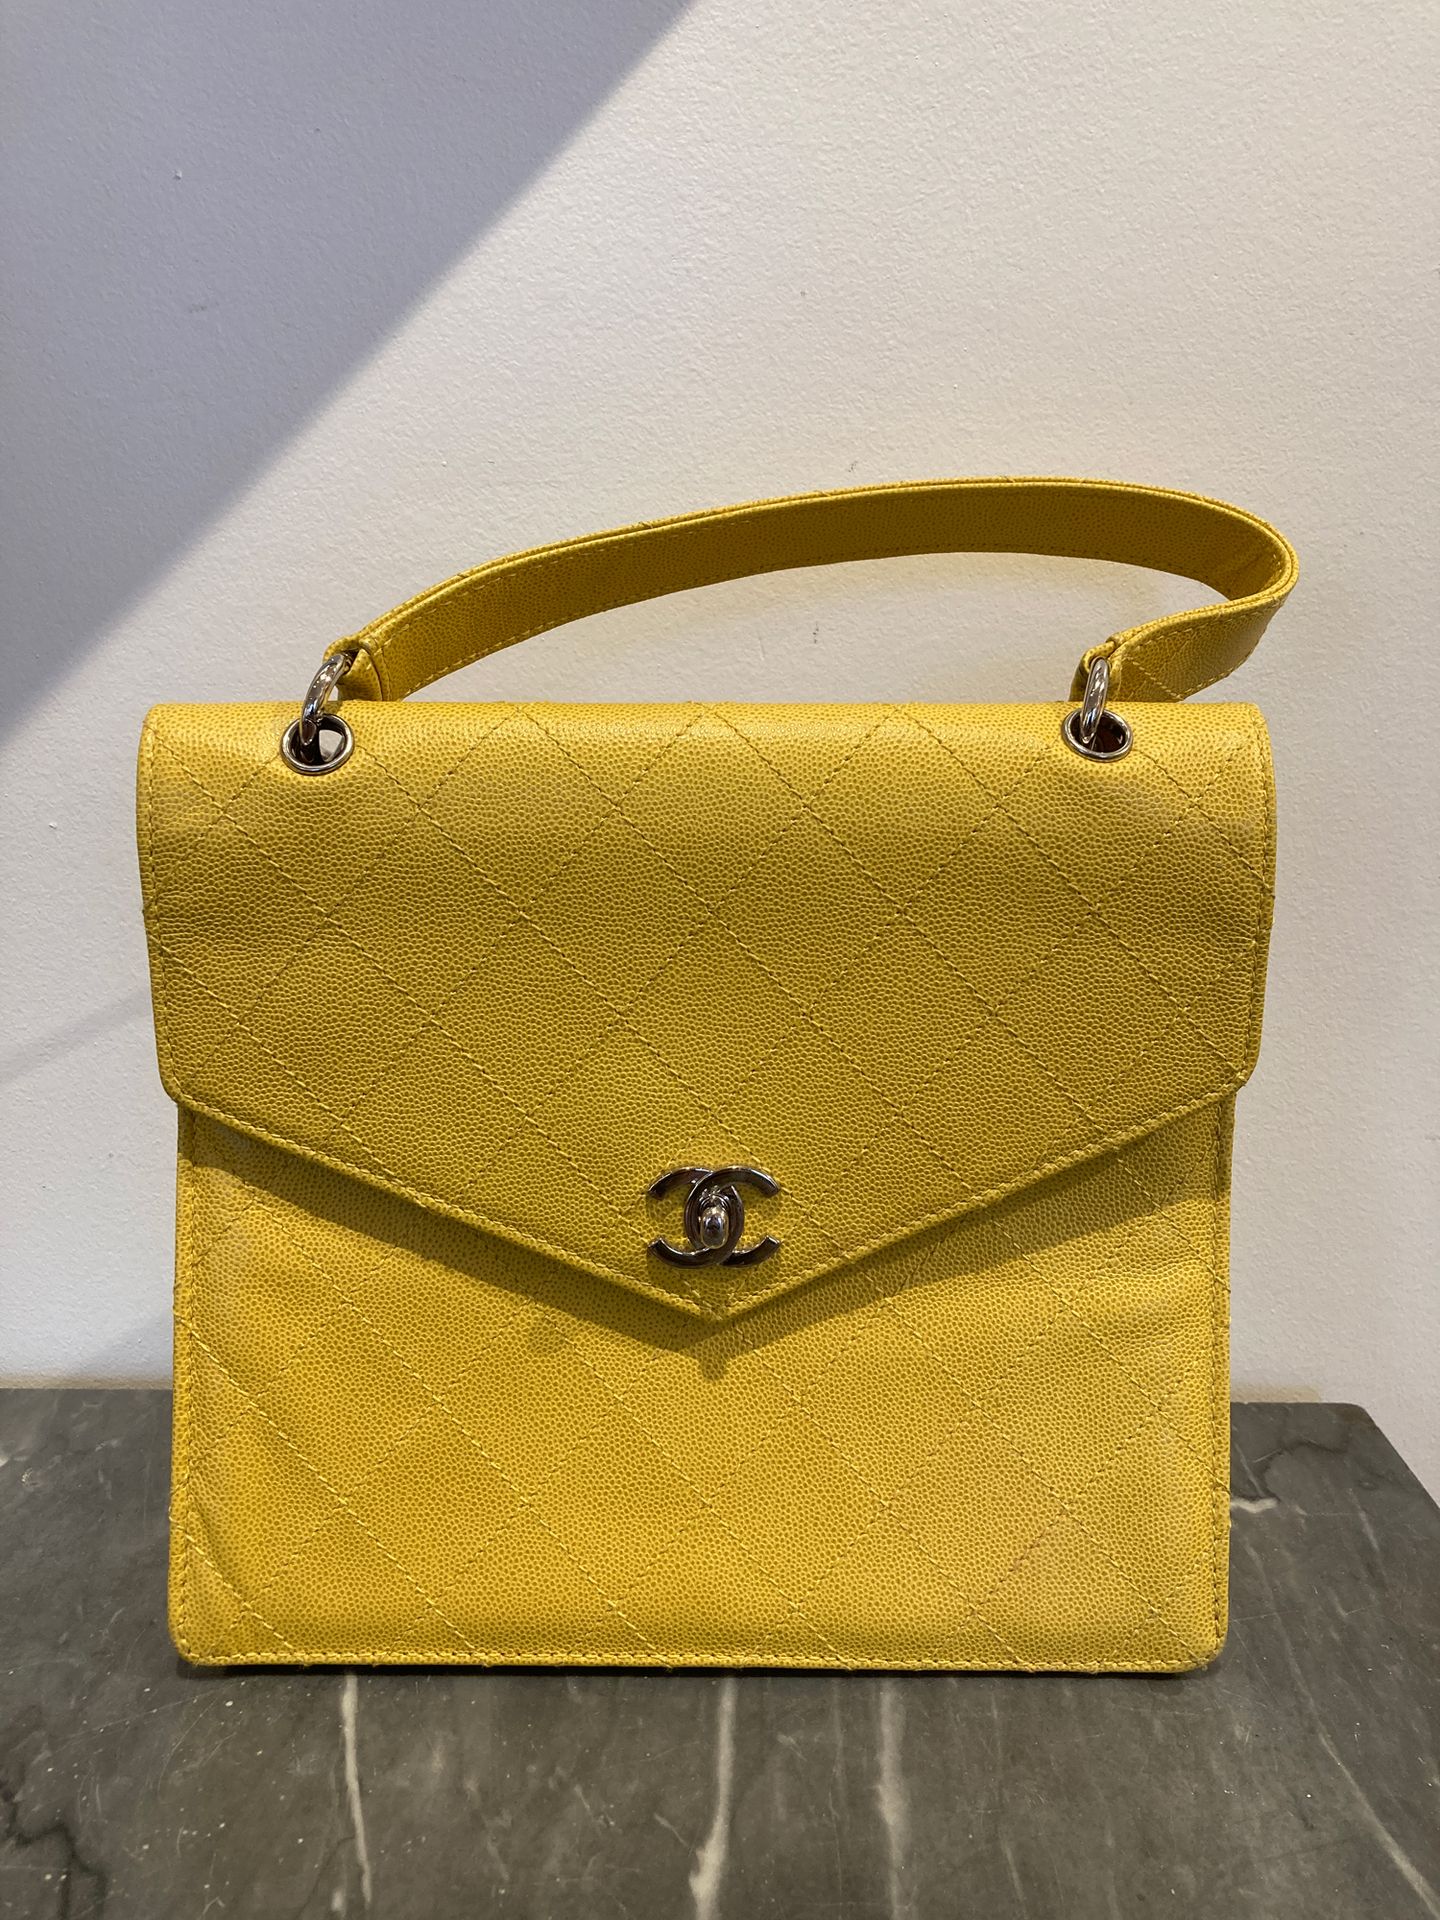 Null CHANEL Handbag in yellow leather, tone on tone stitching, silver clasp with&hellip;